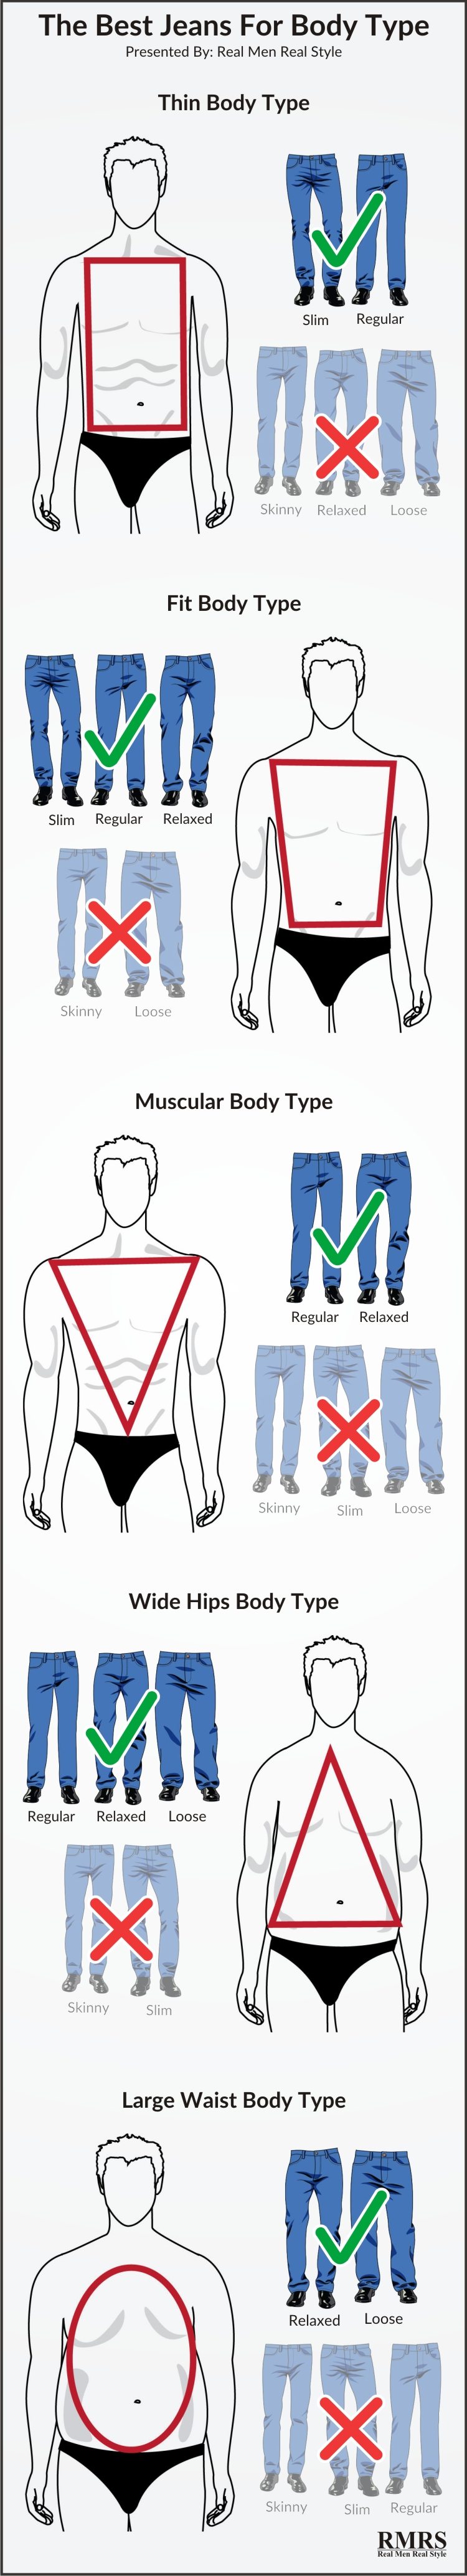 Best Jeans Type Infographic | Jean Fit Guide Men